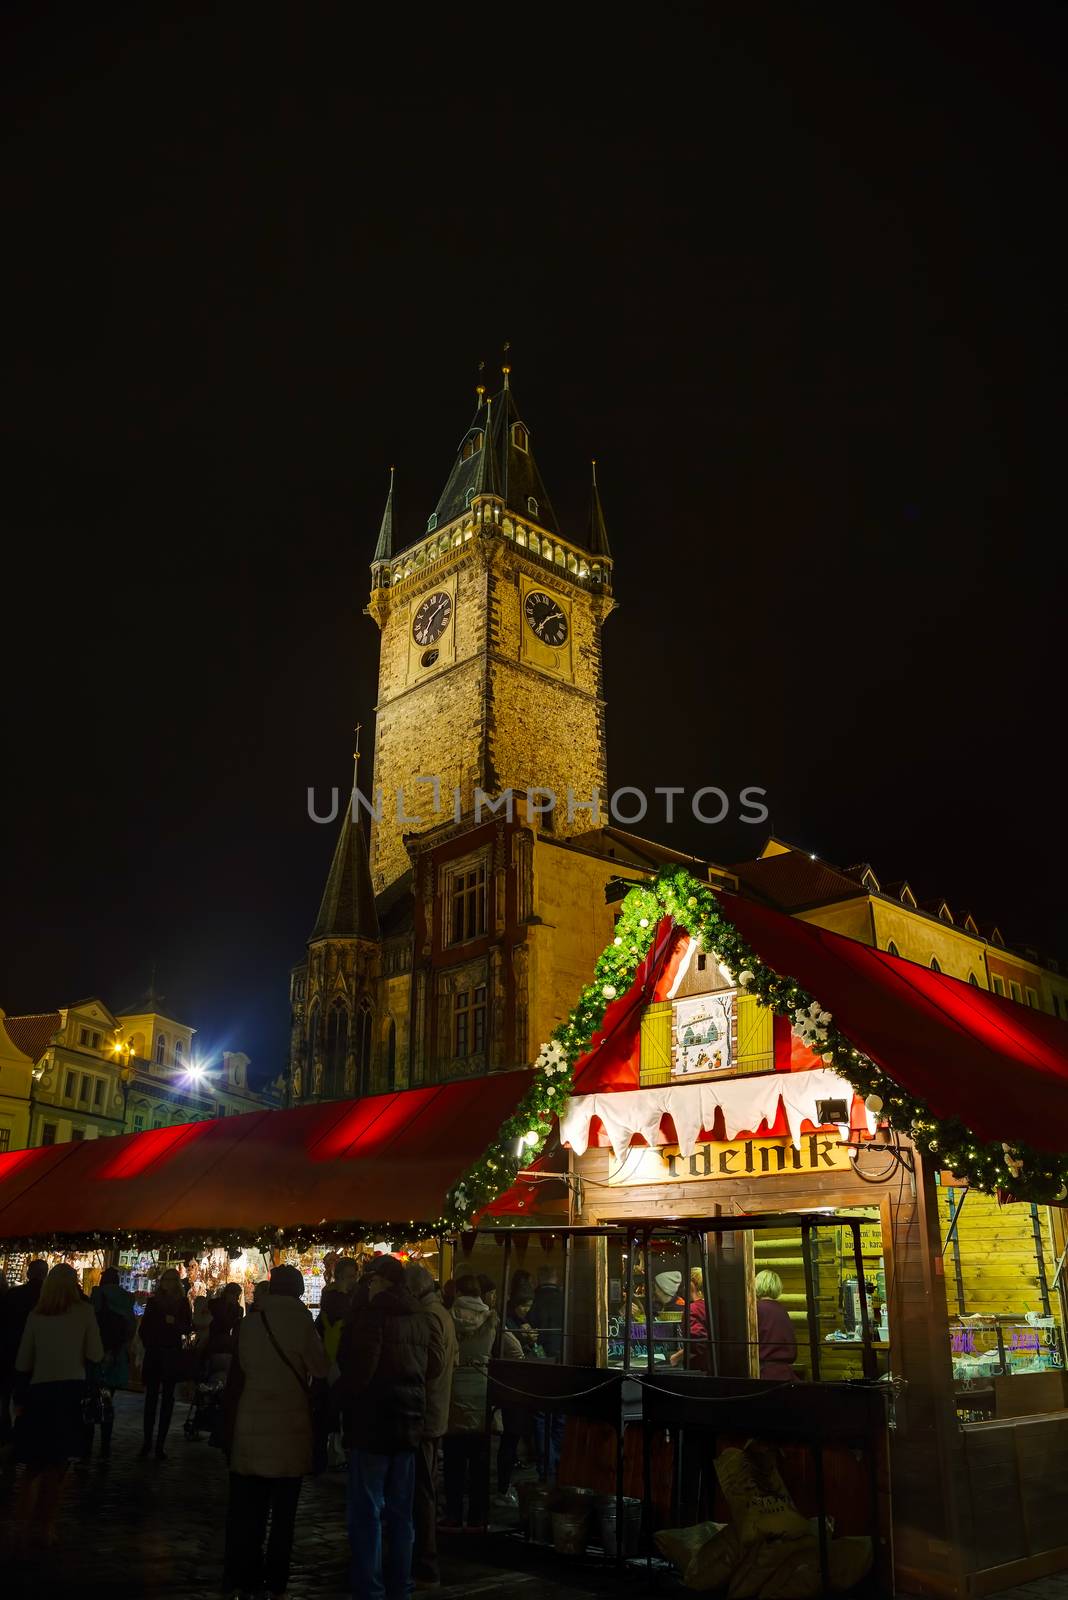 PRAGUE - DECEMBER 2: Decorated for Christmas Old Town Square on December 2, 2015 in Prague, Czech Republic. Prague has been a political, cultural, and economic centre during its 1,100-year existence.